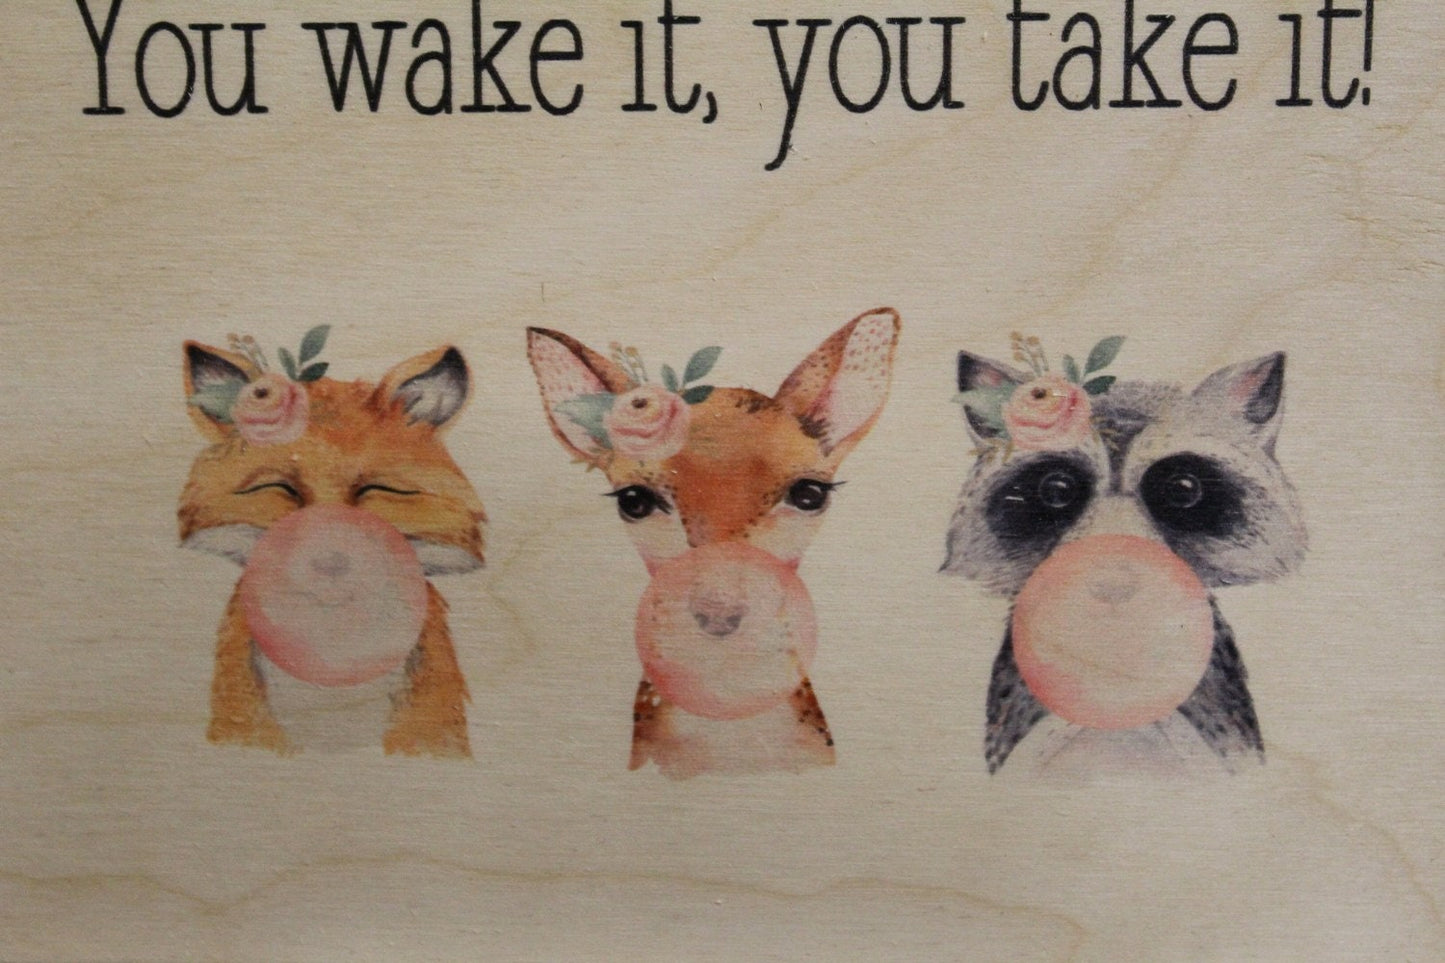 Shhhh Toddler Sleeping Sign You Wake It You Take It Forest Animals Floral Crown Blowing Bubbles Wood Print Framed Fox Raccoon Fawn Nursery